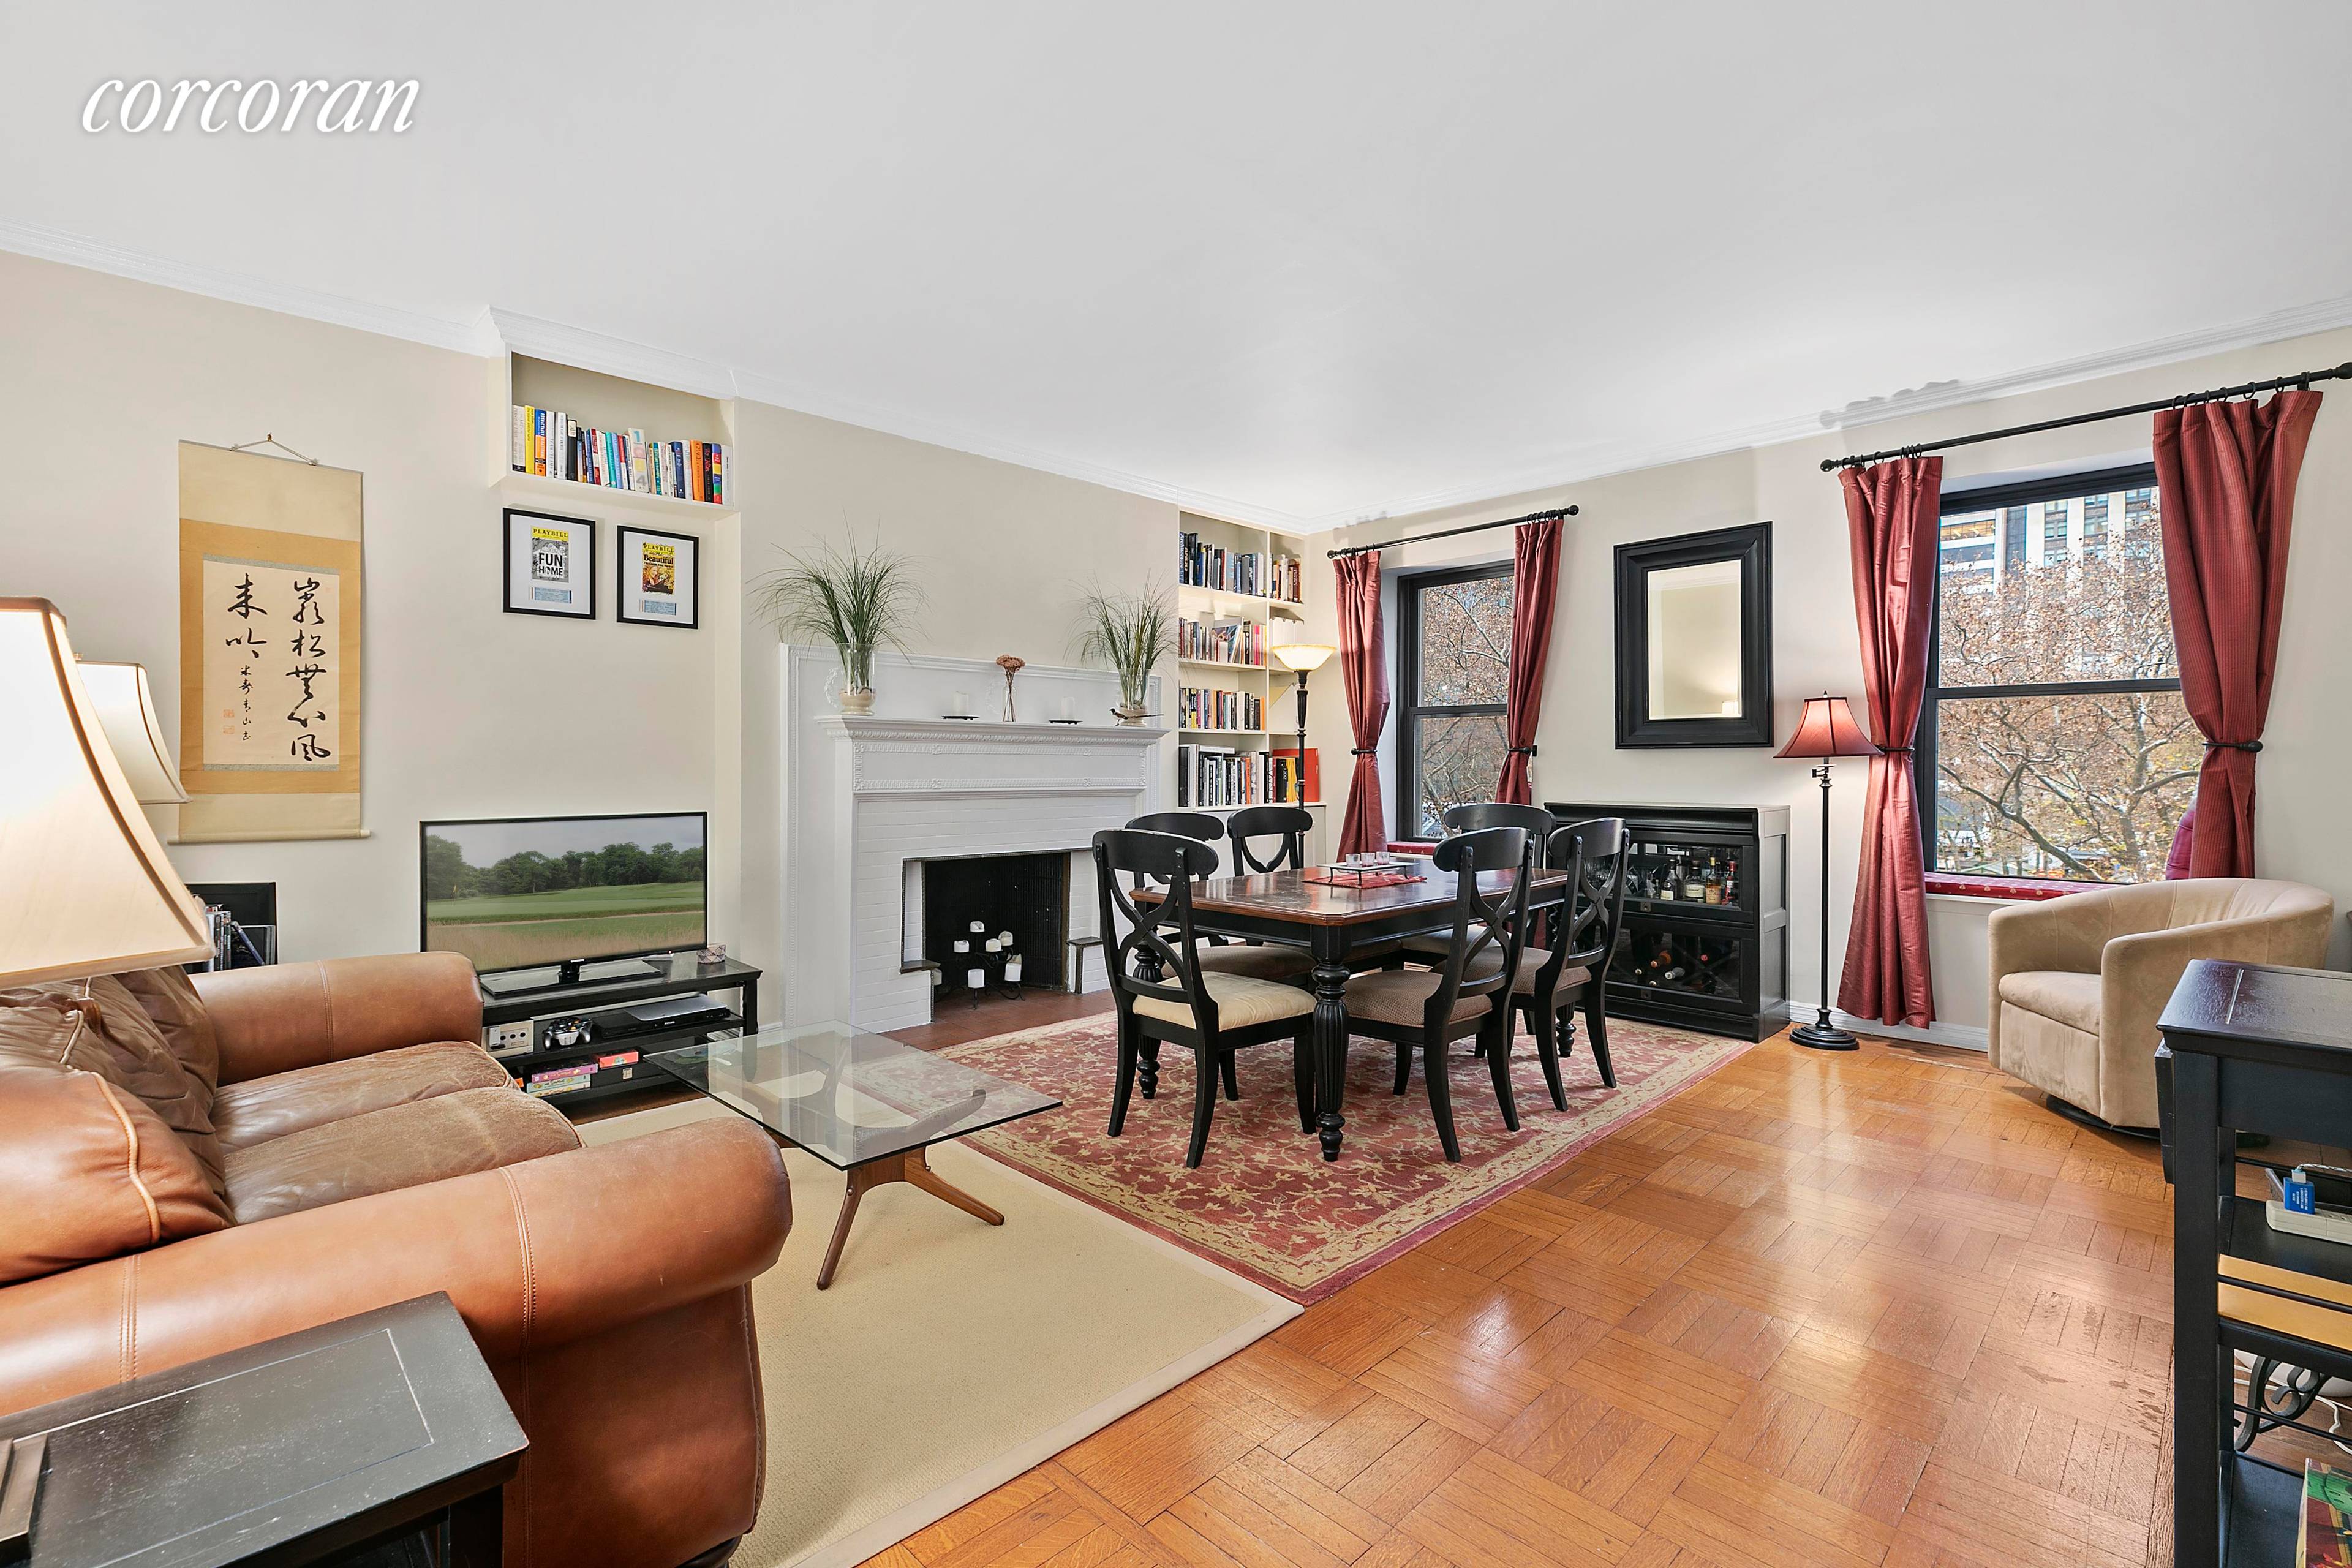 Located at 32 West 40th Street, a historic and well maintained cooperative, this 1 BR 1 BA home is charming and spacious.